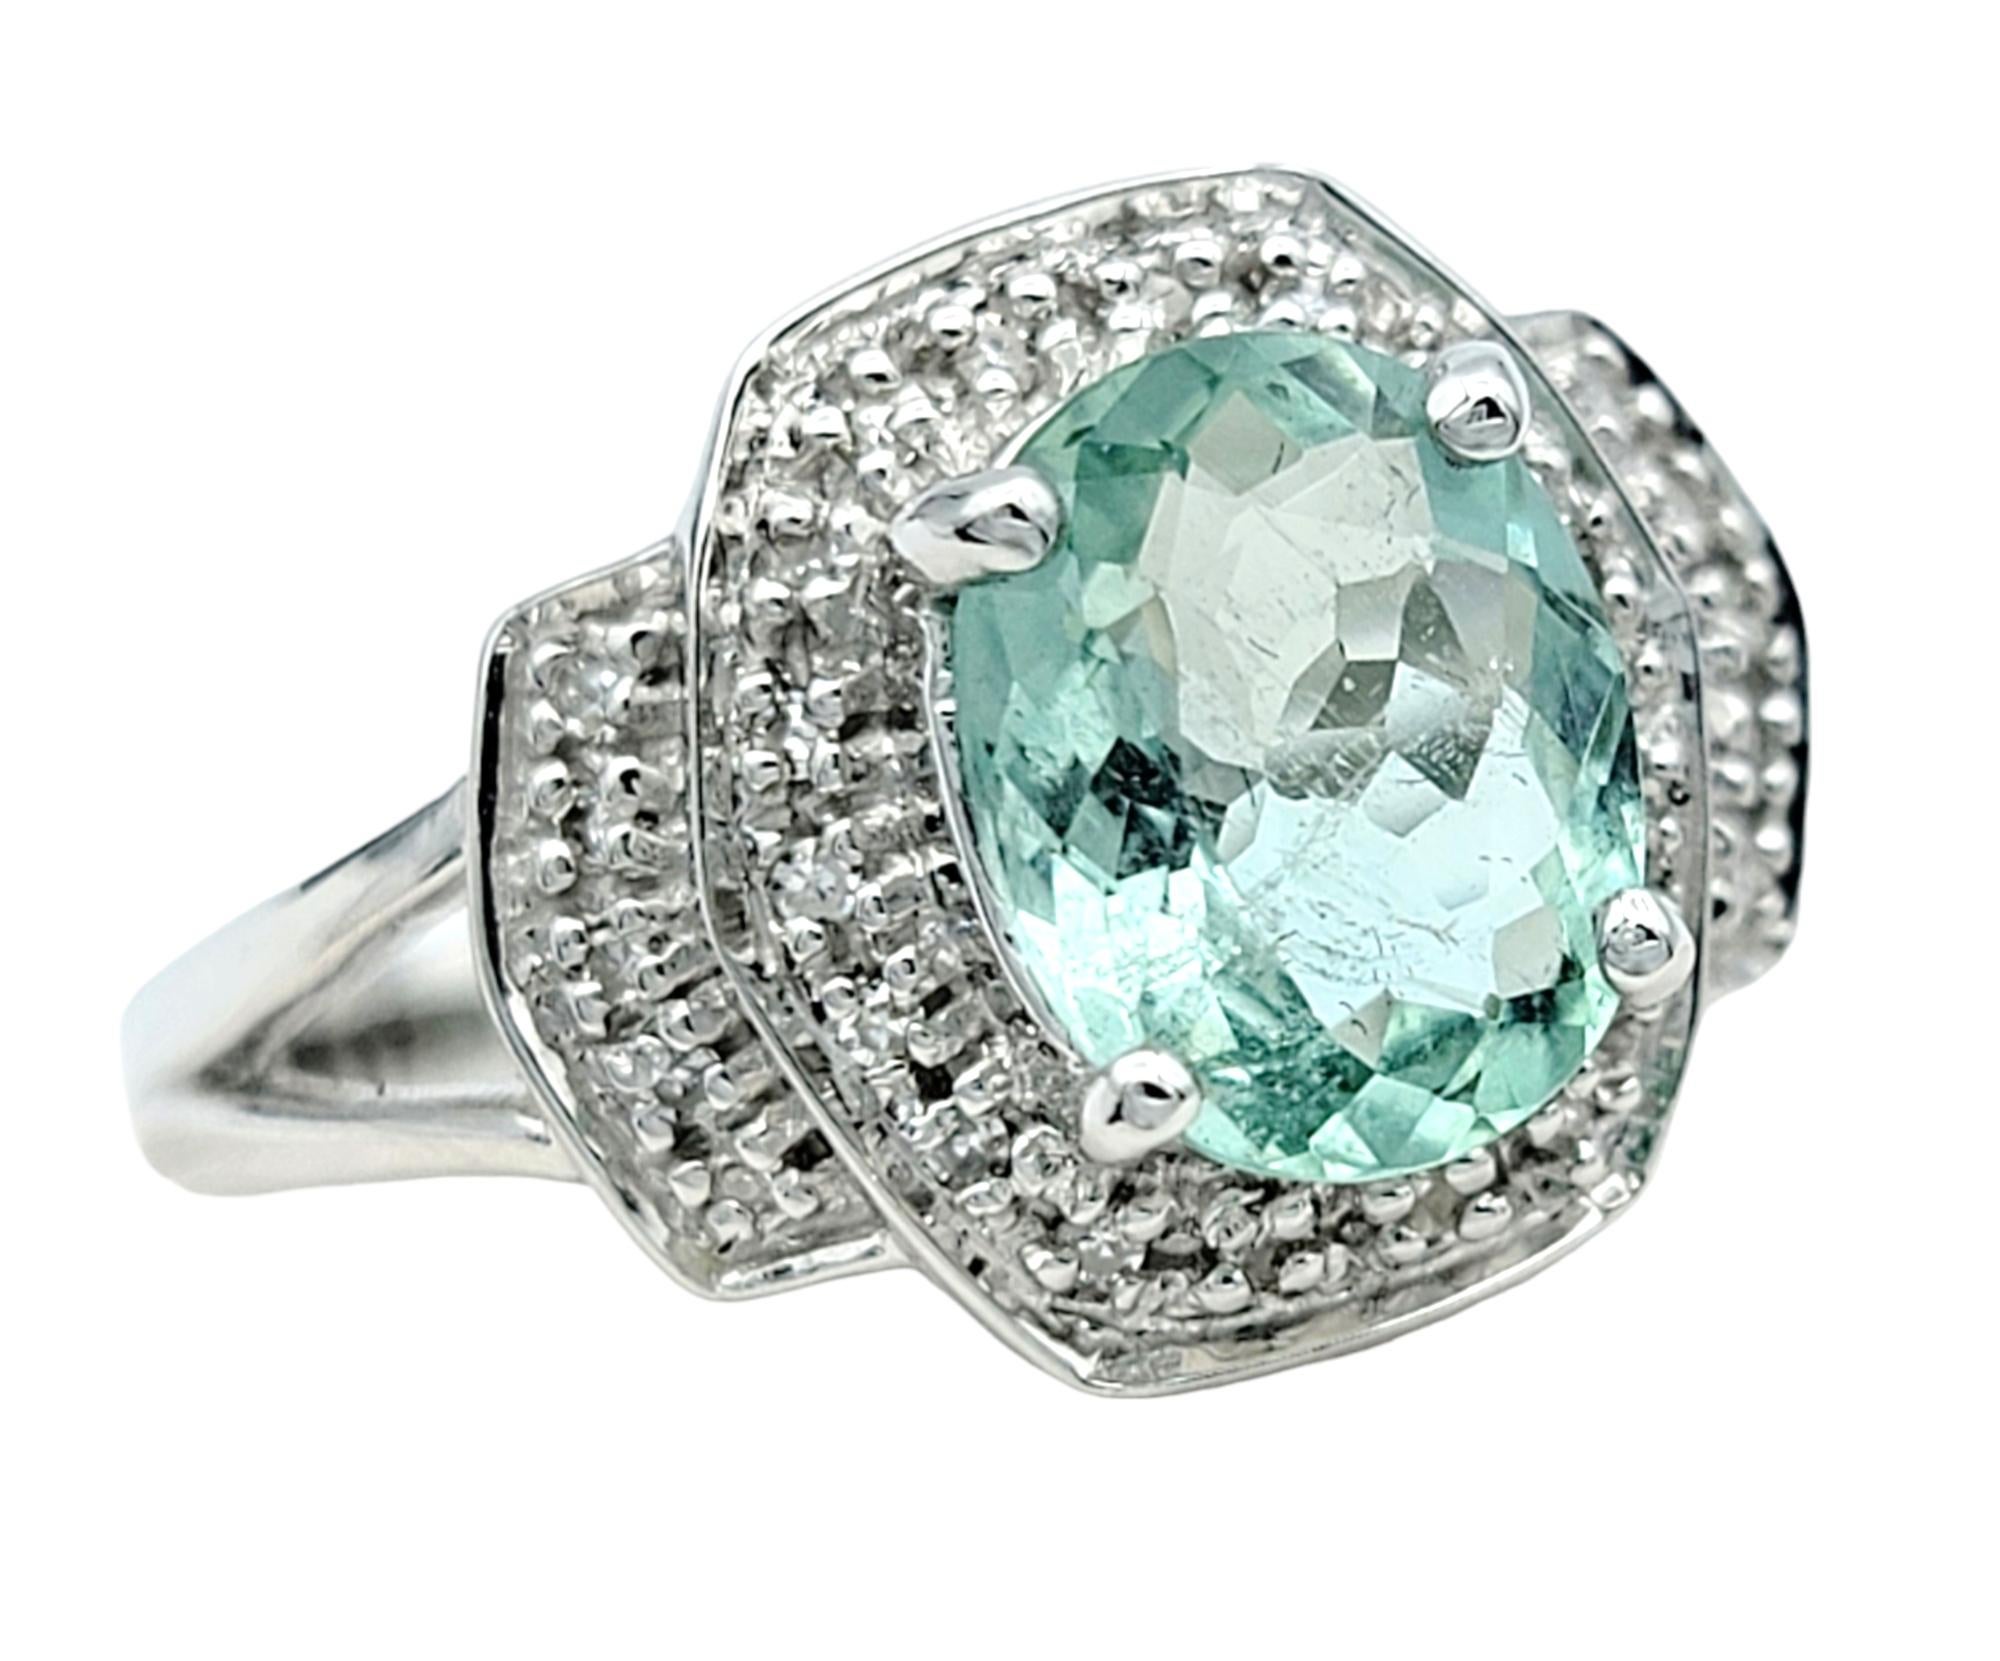 Ring Size: 6.75

Exuding an aura of luxury and refinement, this exquisite ring showcases a captivating oval cut Paraiba tourmaline as its centerpiece. Nestled within a lustrous white gold setting, the vibrant Paraiba tourmaline dazzles with its